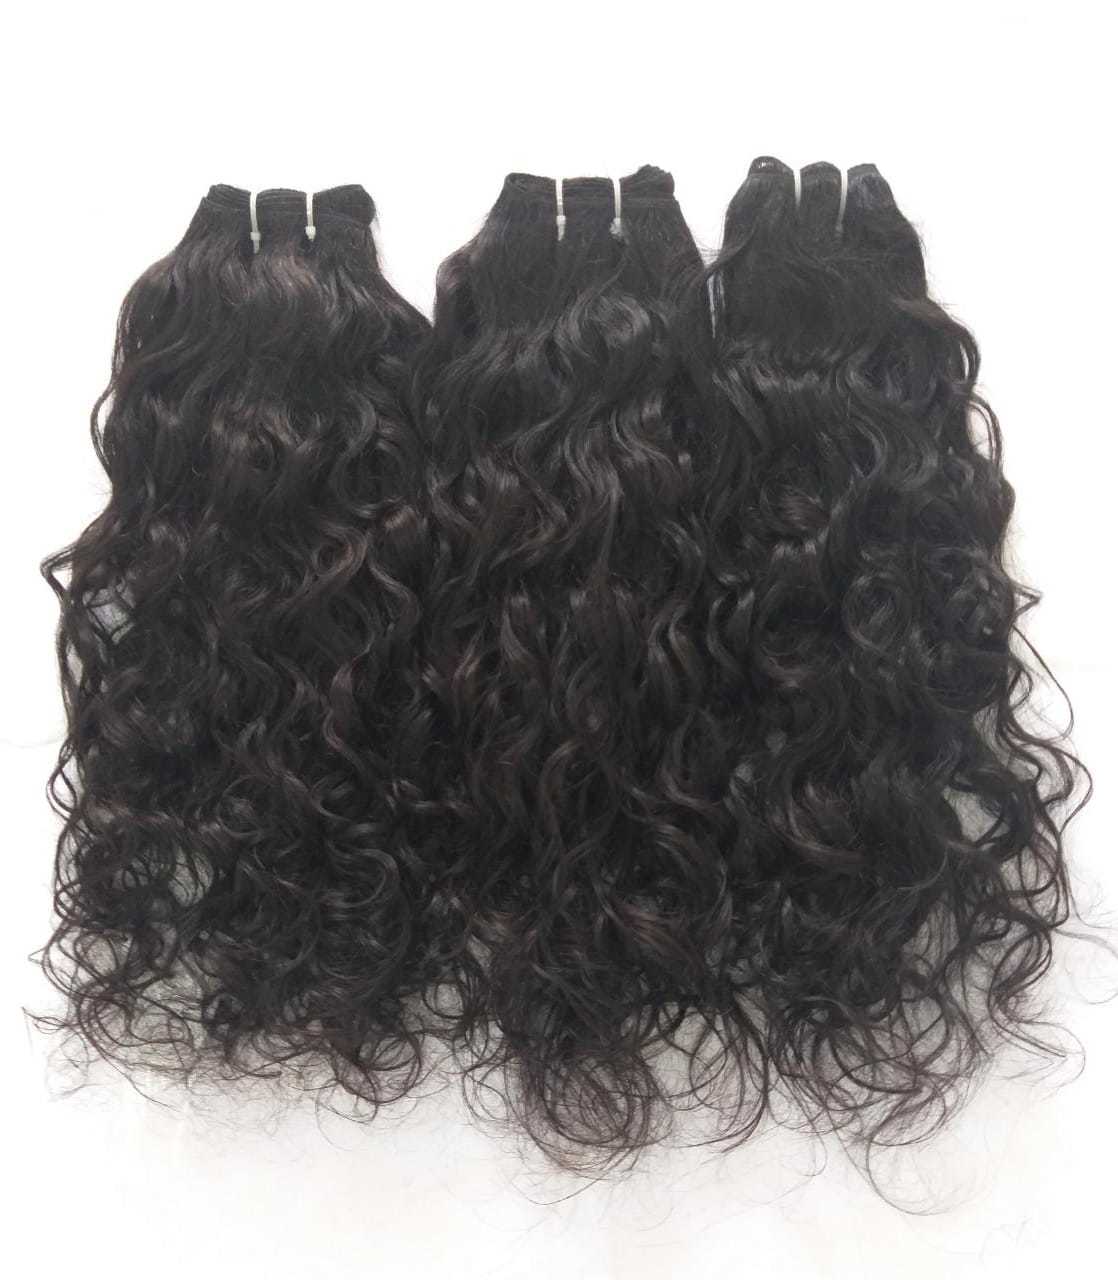 Wholesale Price Top Quality Virgin Human Hair remy Curly Human Hair